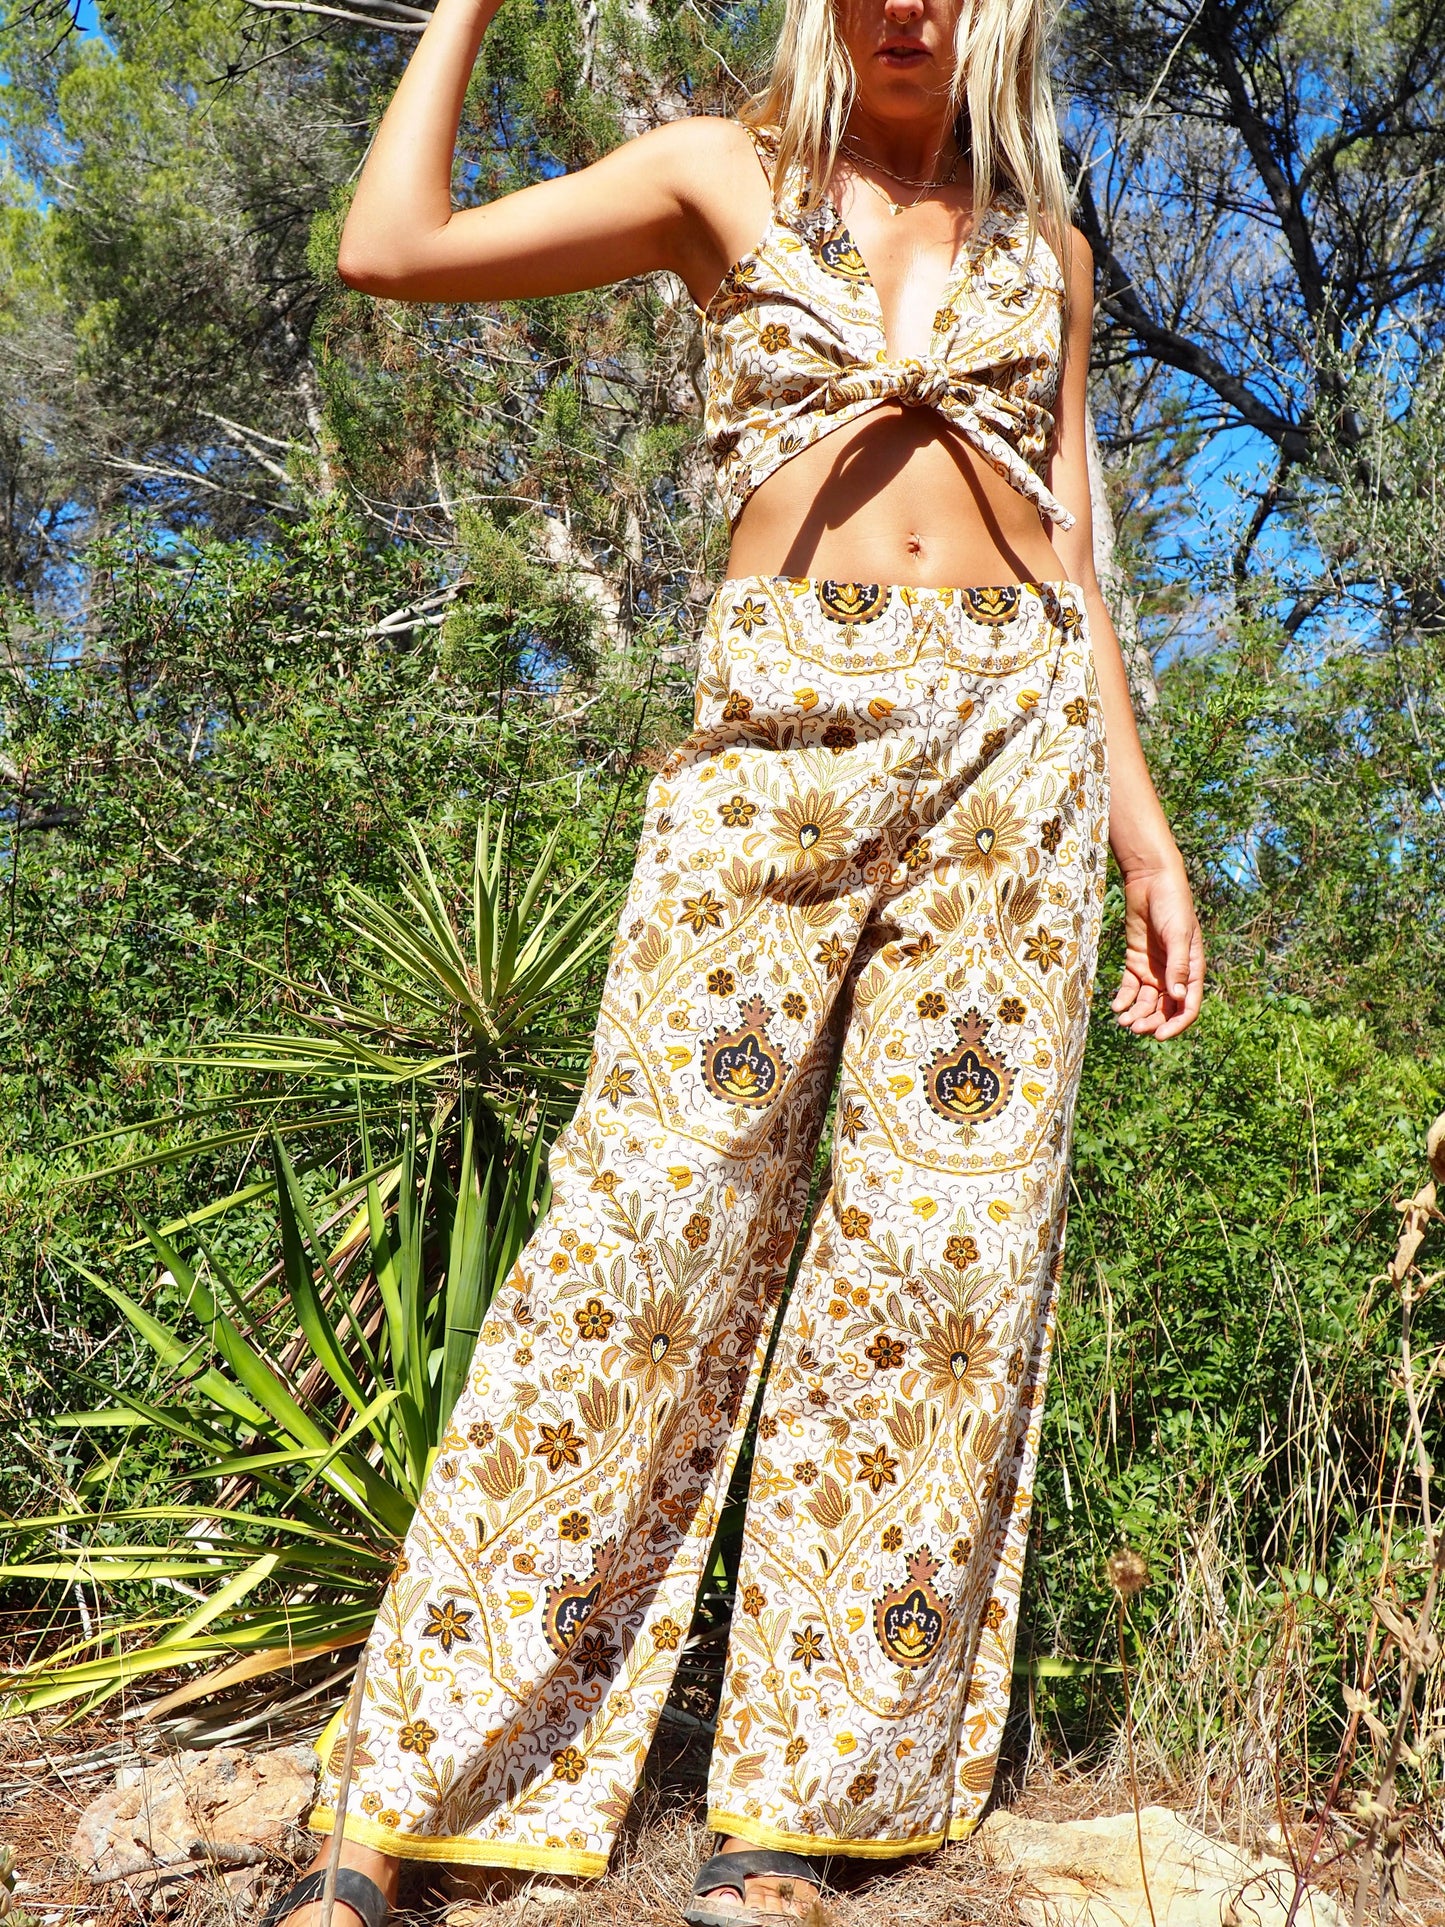 Up-cycled heavy cotton wide leg pants Cream yellow and  black floral printed textiles from france very nice quality by Vagabond Ibiza made